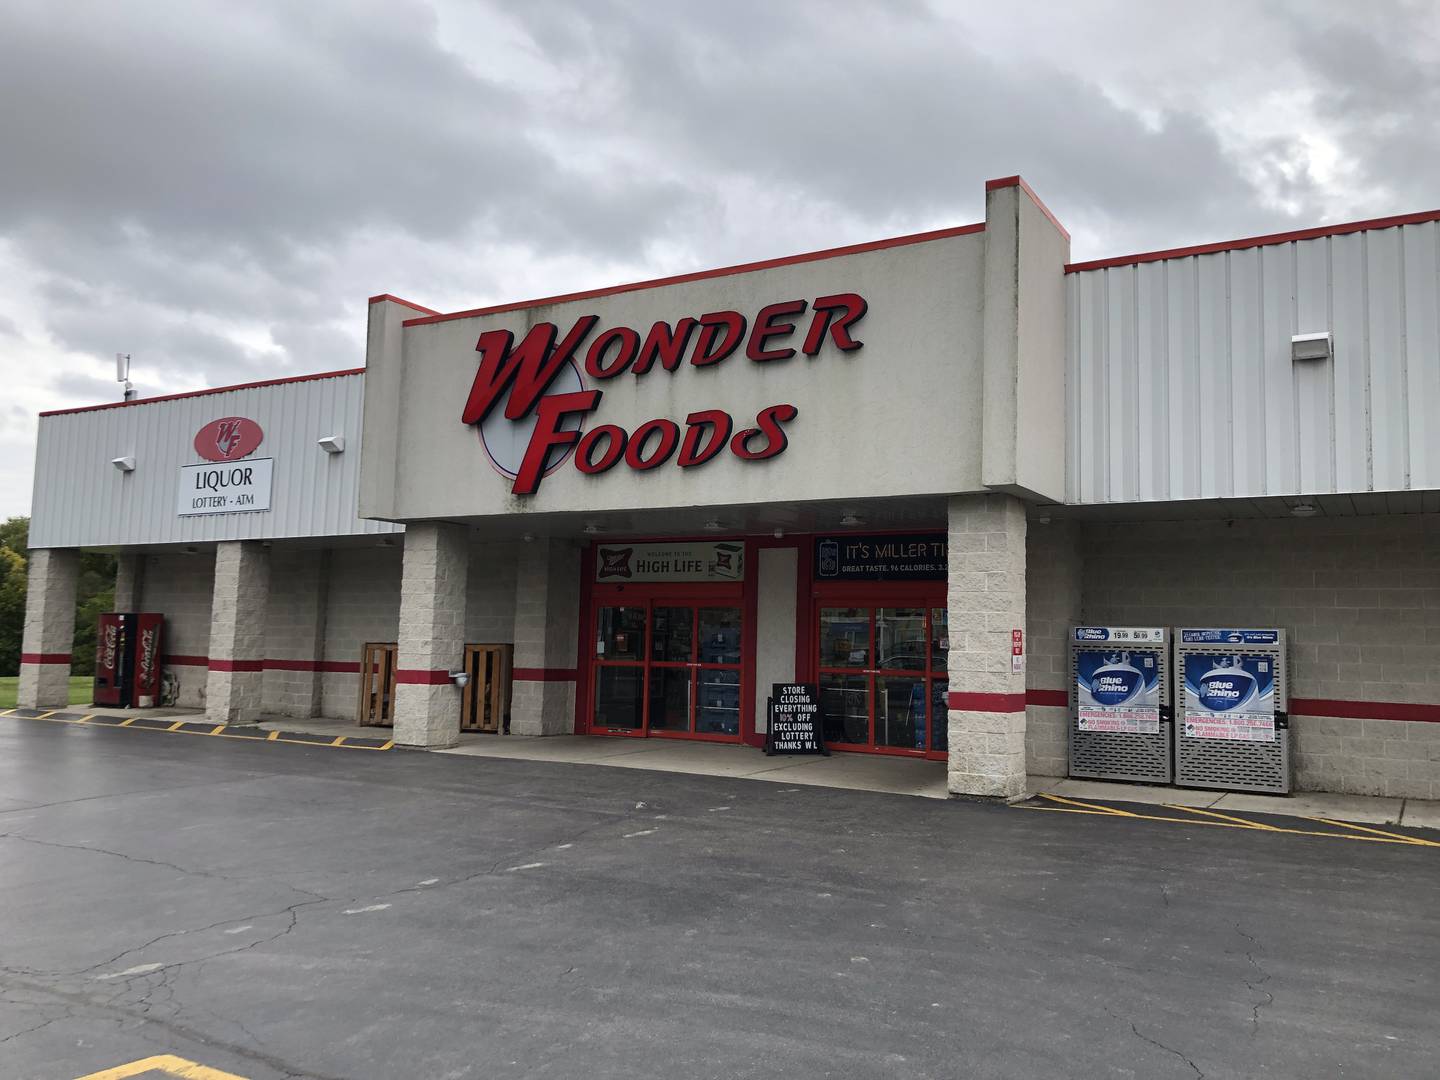 Management at Wonder Foods, 7505 Hancock Drive, Wonder Lake, announced the grocery store is closing. The store announced on Sunday, Oct. 16, that everything in the building except lottery tickets would be sold at a 10 percent discount.